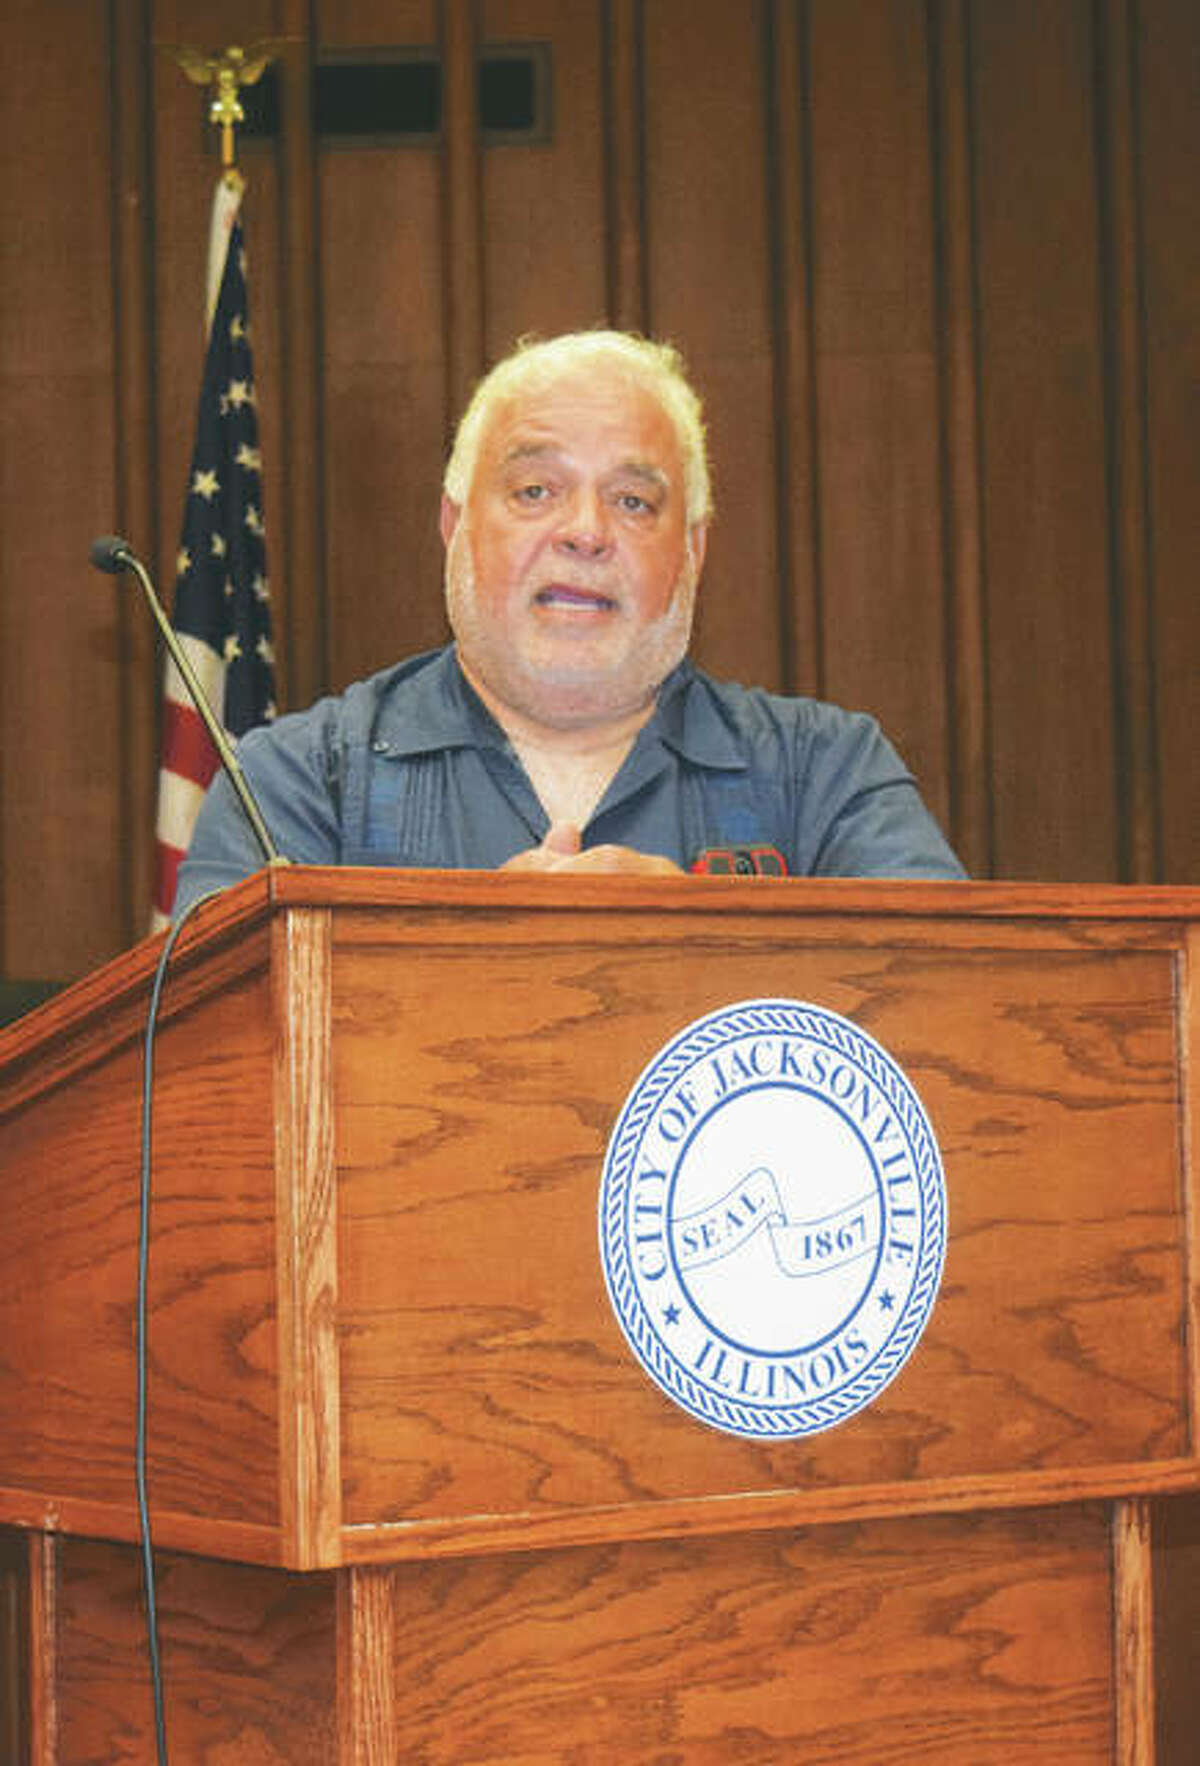 Nestor Gutierrez, a Jacksonville resident who fled Cuba in 1961, discusses poor conditions in the island nation during Tuesday’s meeting of the Republican Women’s Club of Morgan County. Gutierrez said Cuba should serve as a warning to the U.S. about adopting socialism.